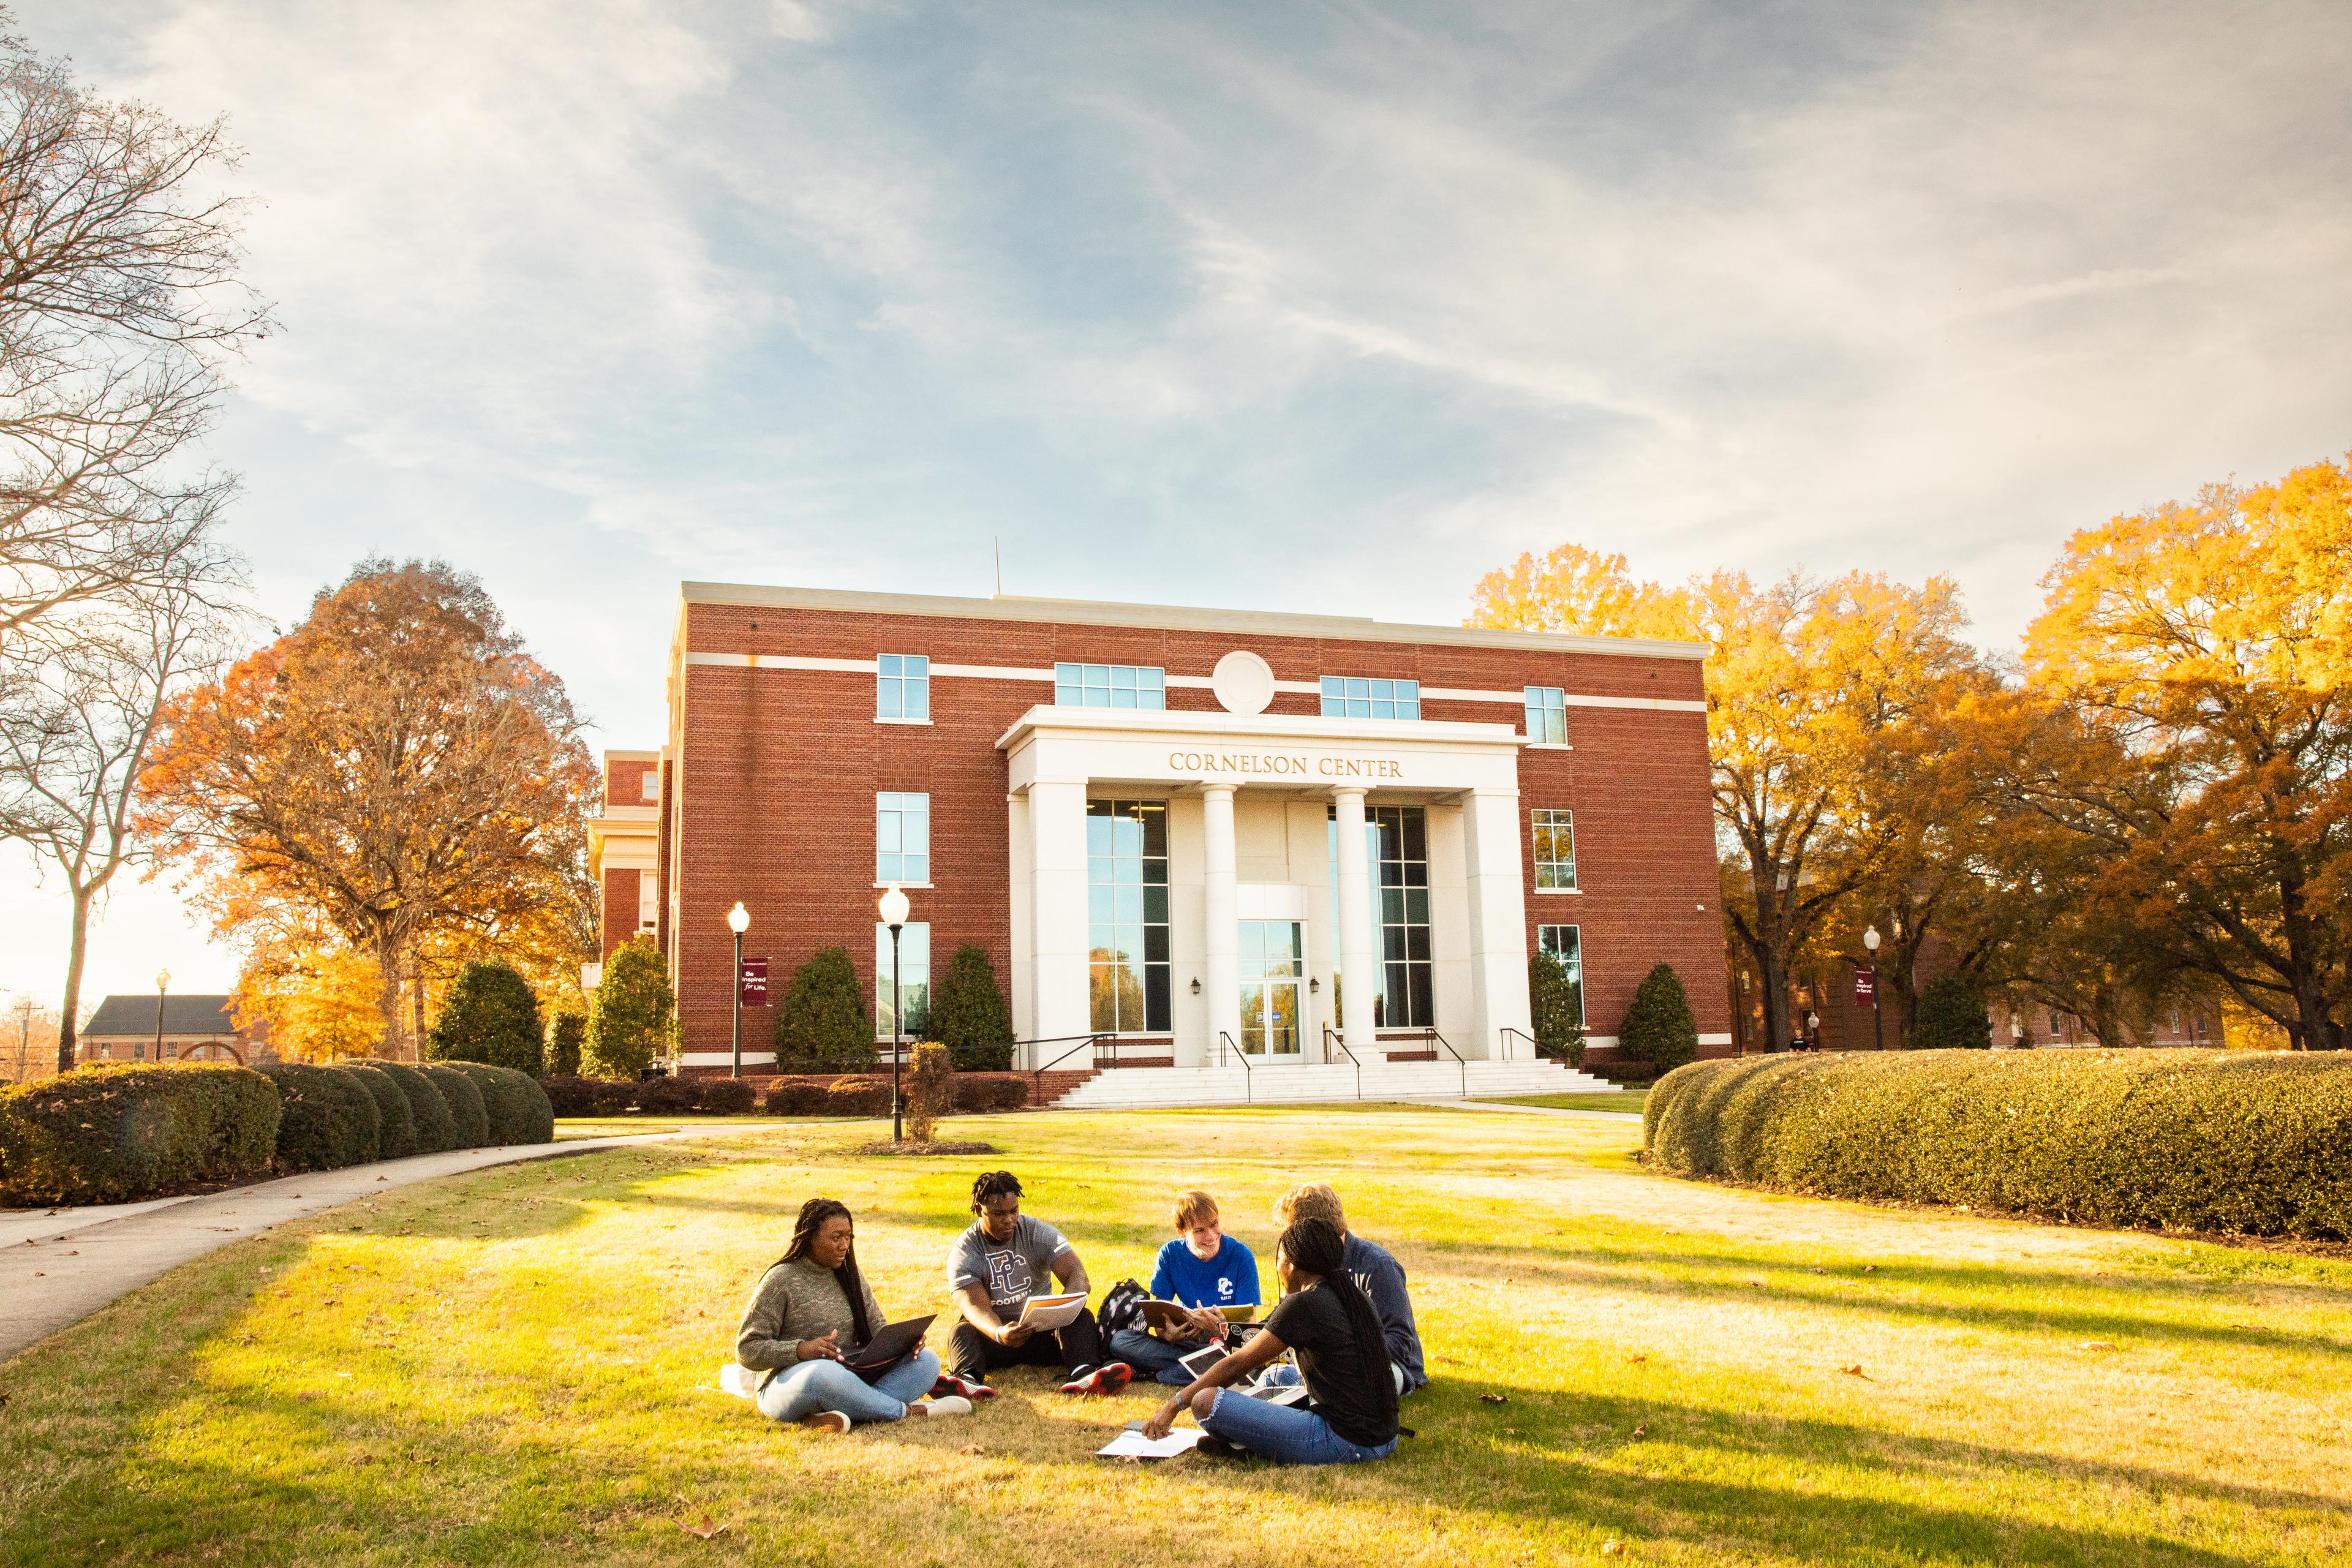 Five college students seated on the school grounds in front of Presbyterian College's Cornelson Center building; appear to be discussing.